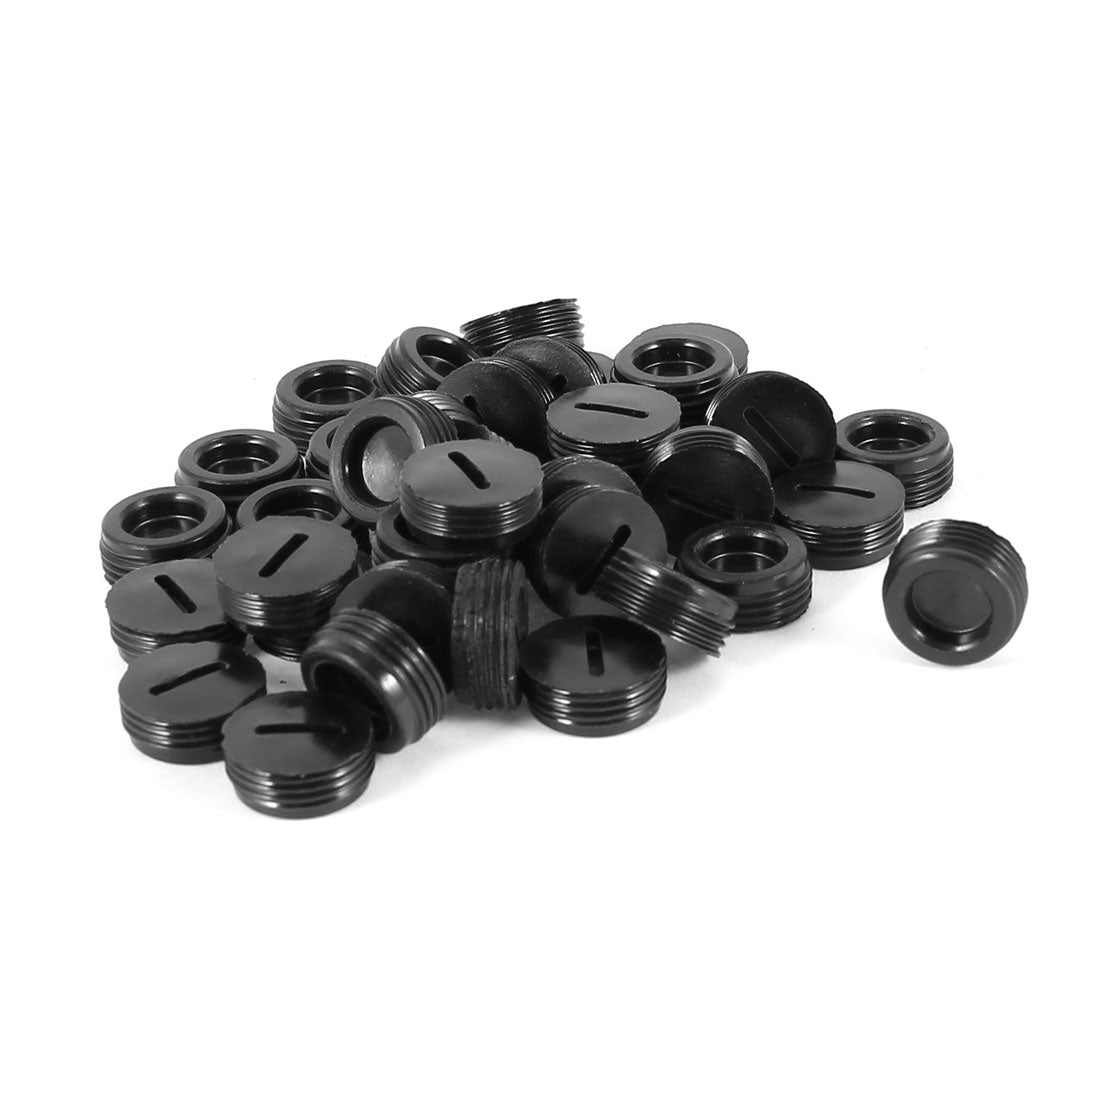 uxcell Uxcell 40 Pcs 6mm Height 13.5mm Dia External Screw Slotted Top Black Plastic Motor Carbon Brush Holder Cap Cover